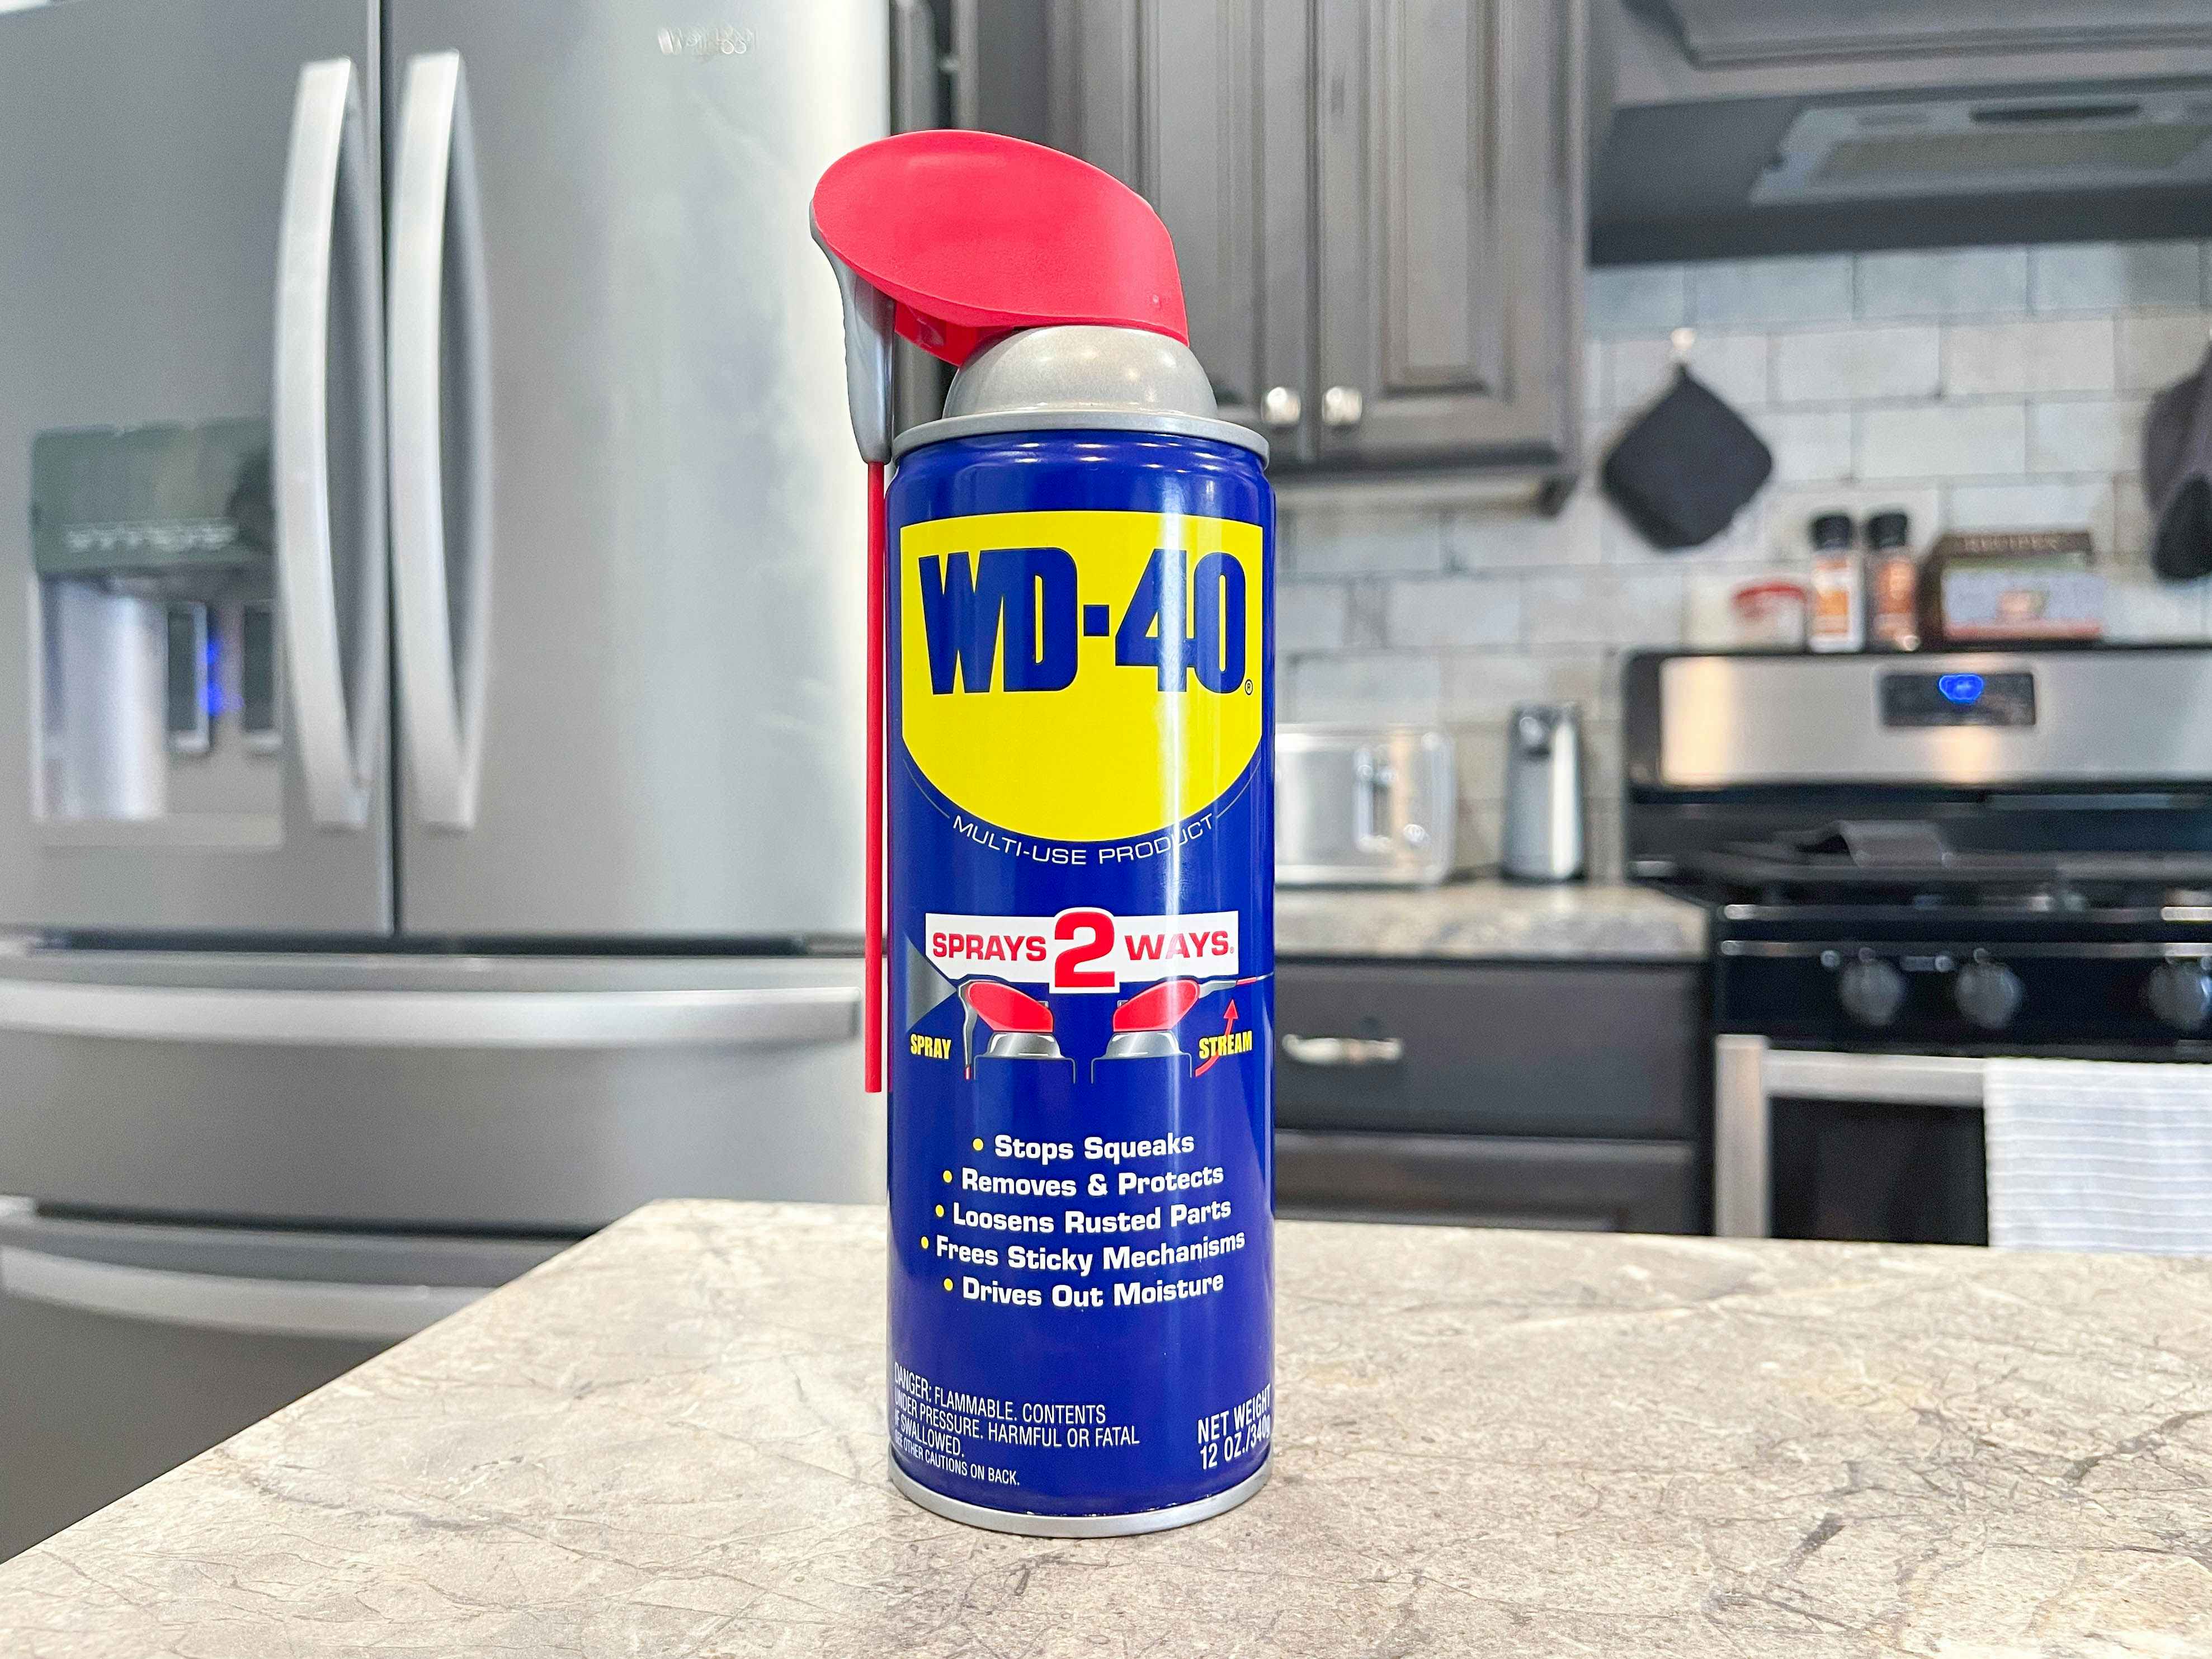 can of wd-40 on kitchen counter